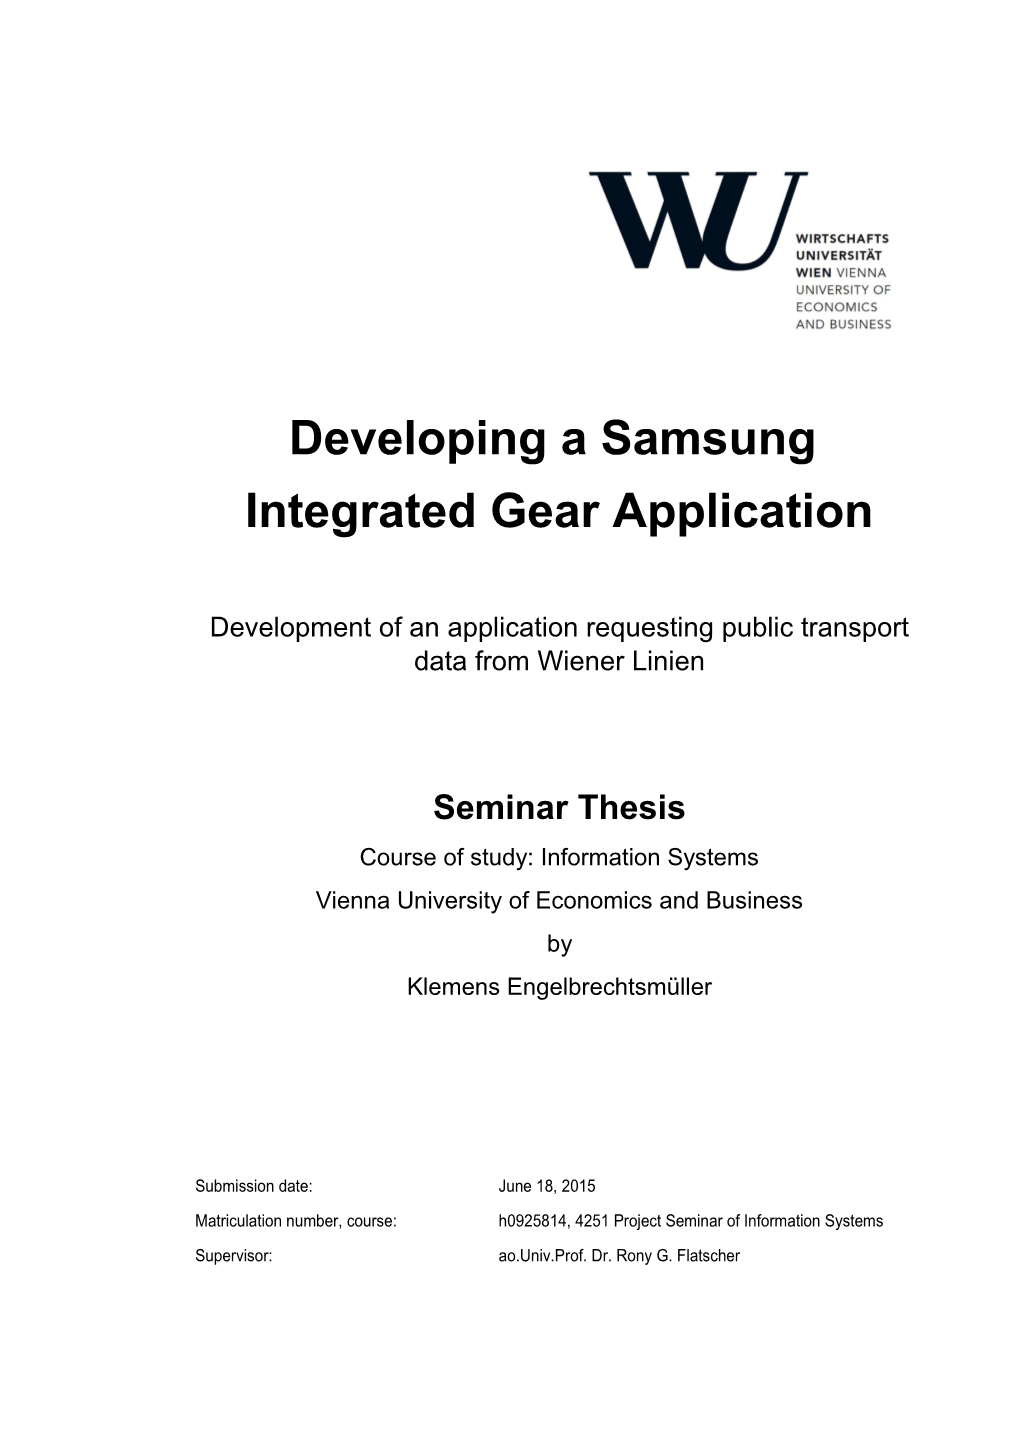 Developing a Samsung Integrated Gear Application